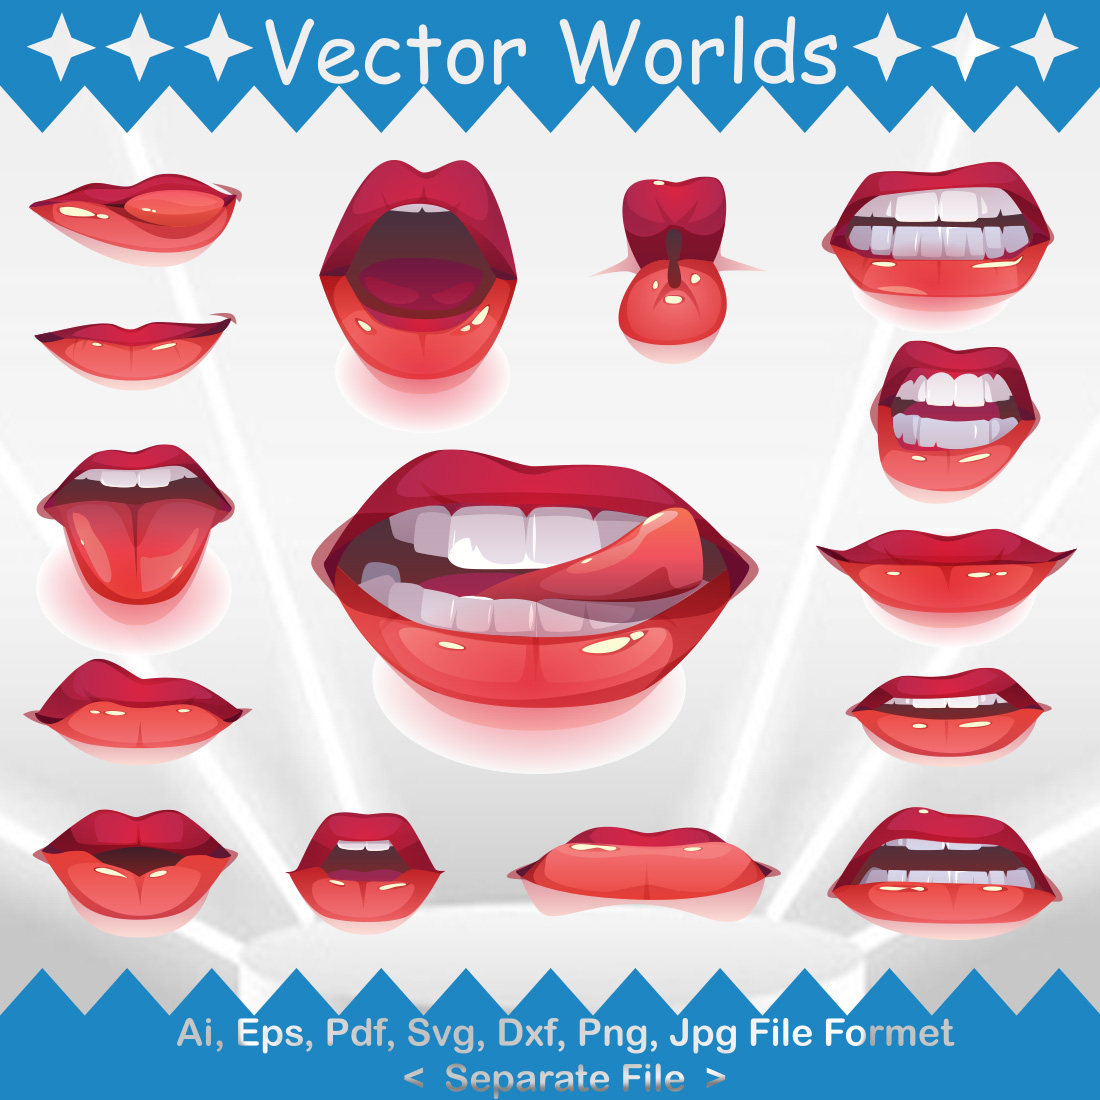 Lips Tongue Out Lips Tongue Out Svg Lips Mouth Lips Svg Lips Vector Lips  Clipart Tongue Svg T